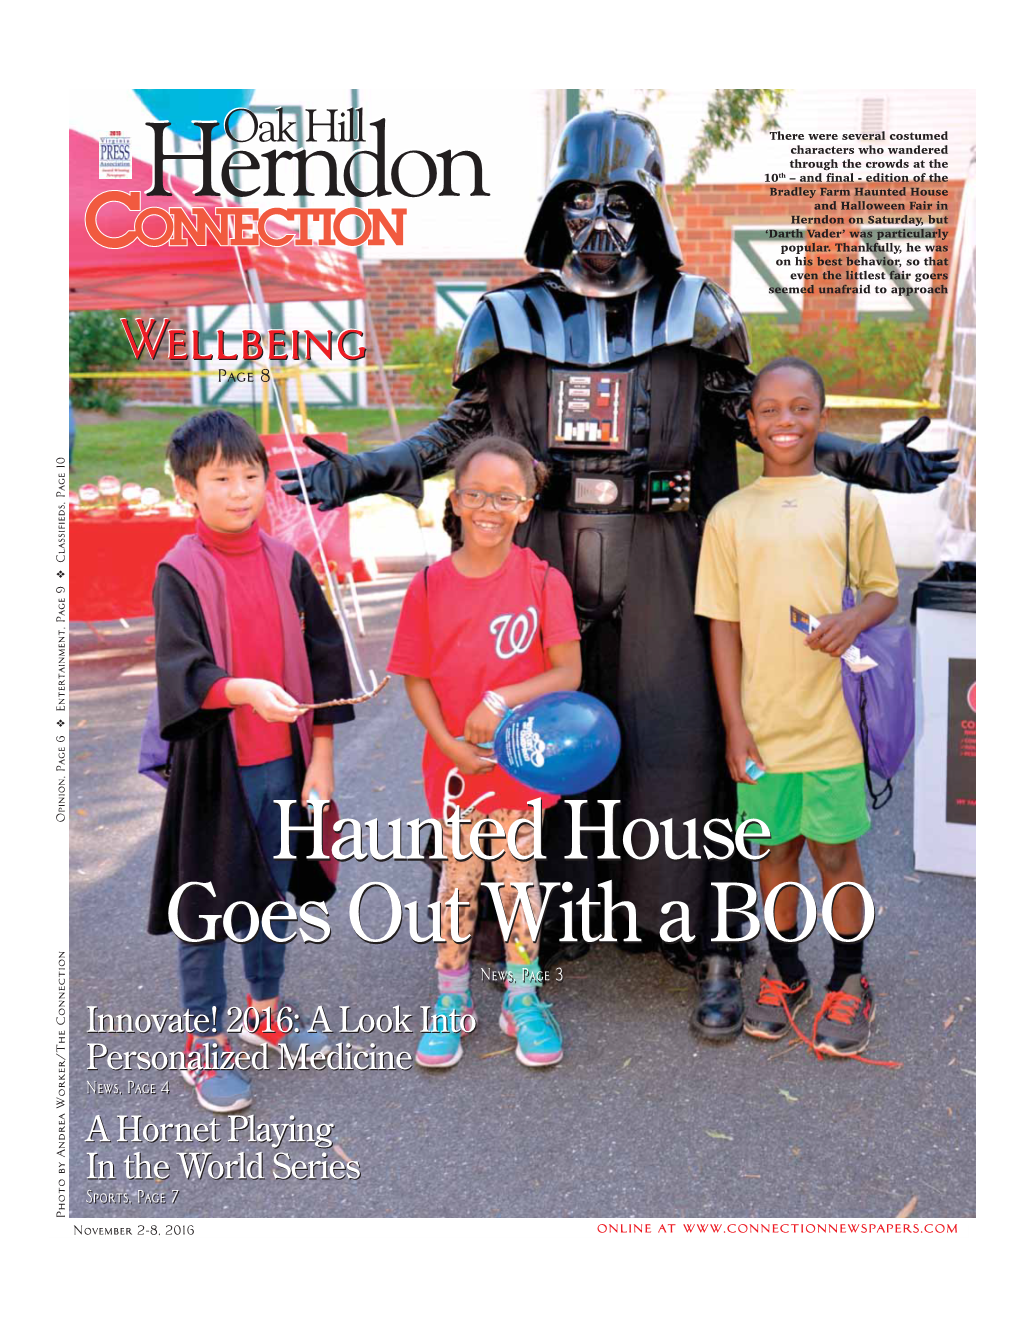 Herndonherndon and Halloween Fair in Herndon on Saturday, but ‘Darth Vader’ Was Particularly Popular